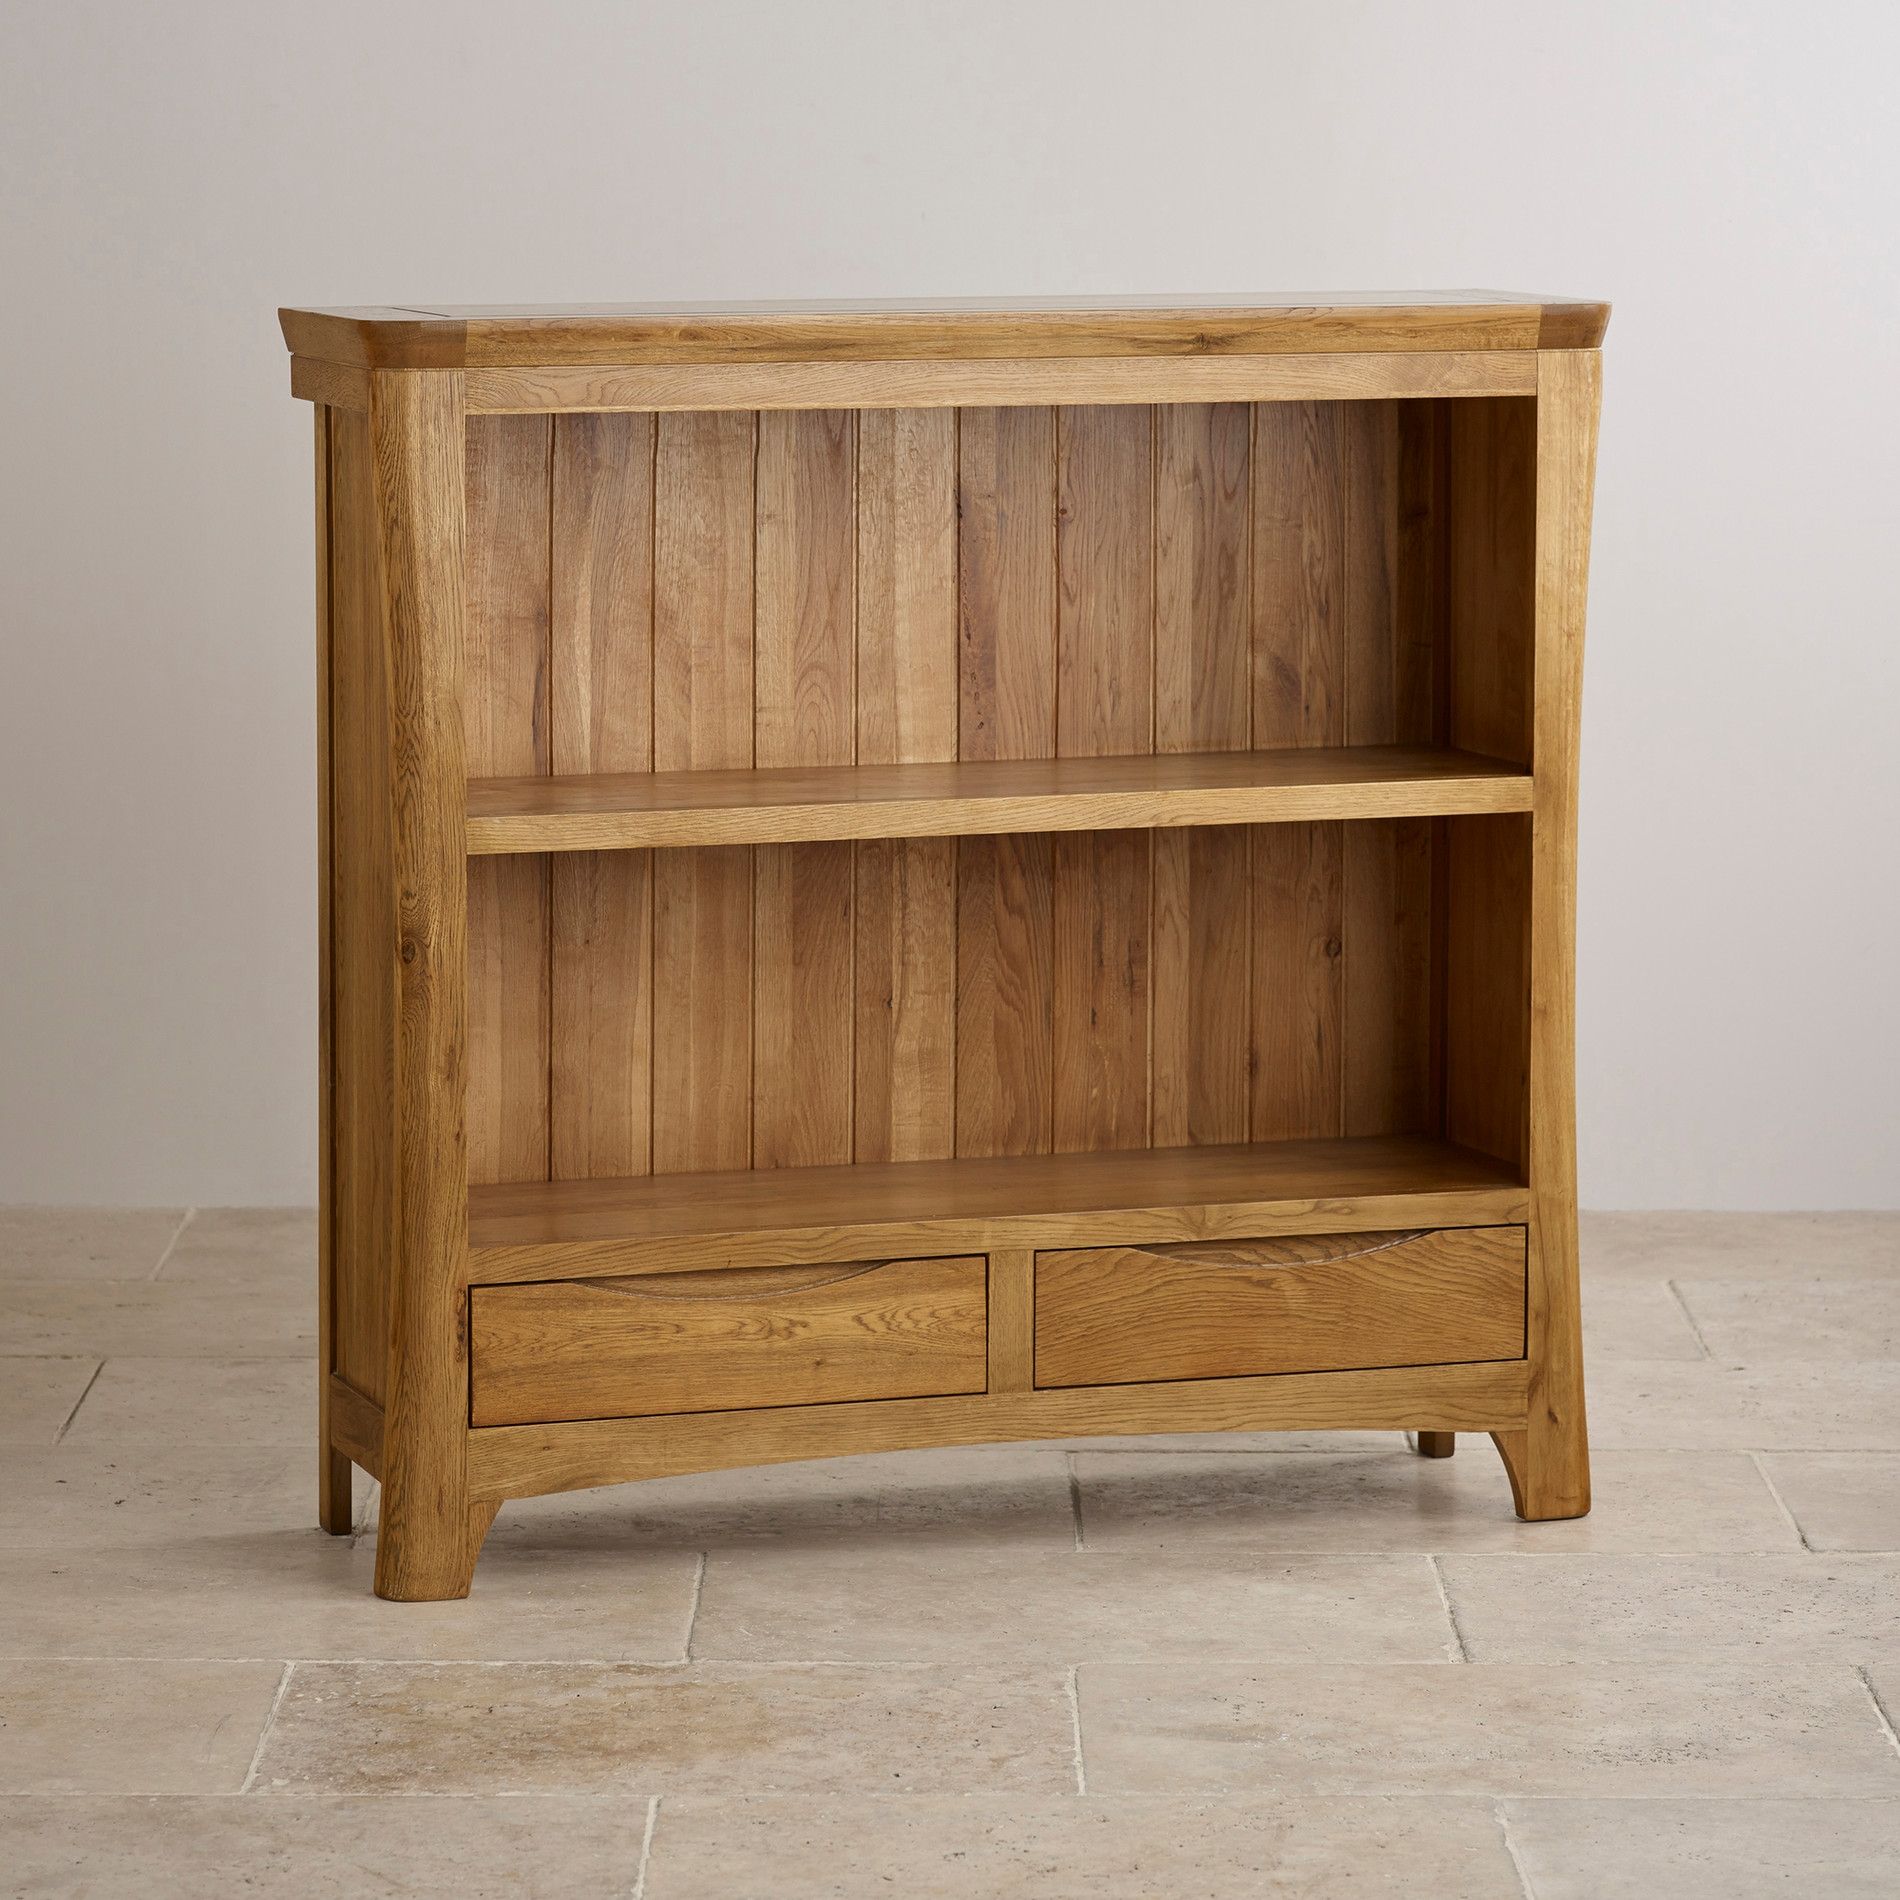 Bookcases Function And Style Oak Furniture Land Intended For Oak Bookcase (View 3 of 8)